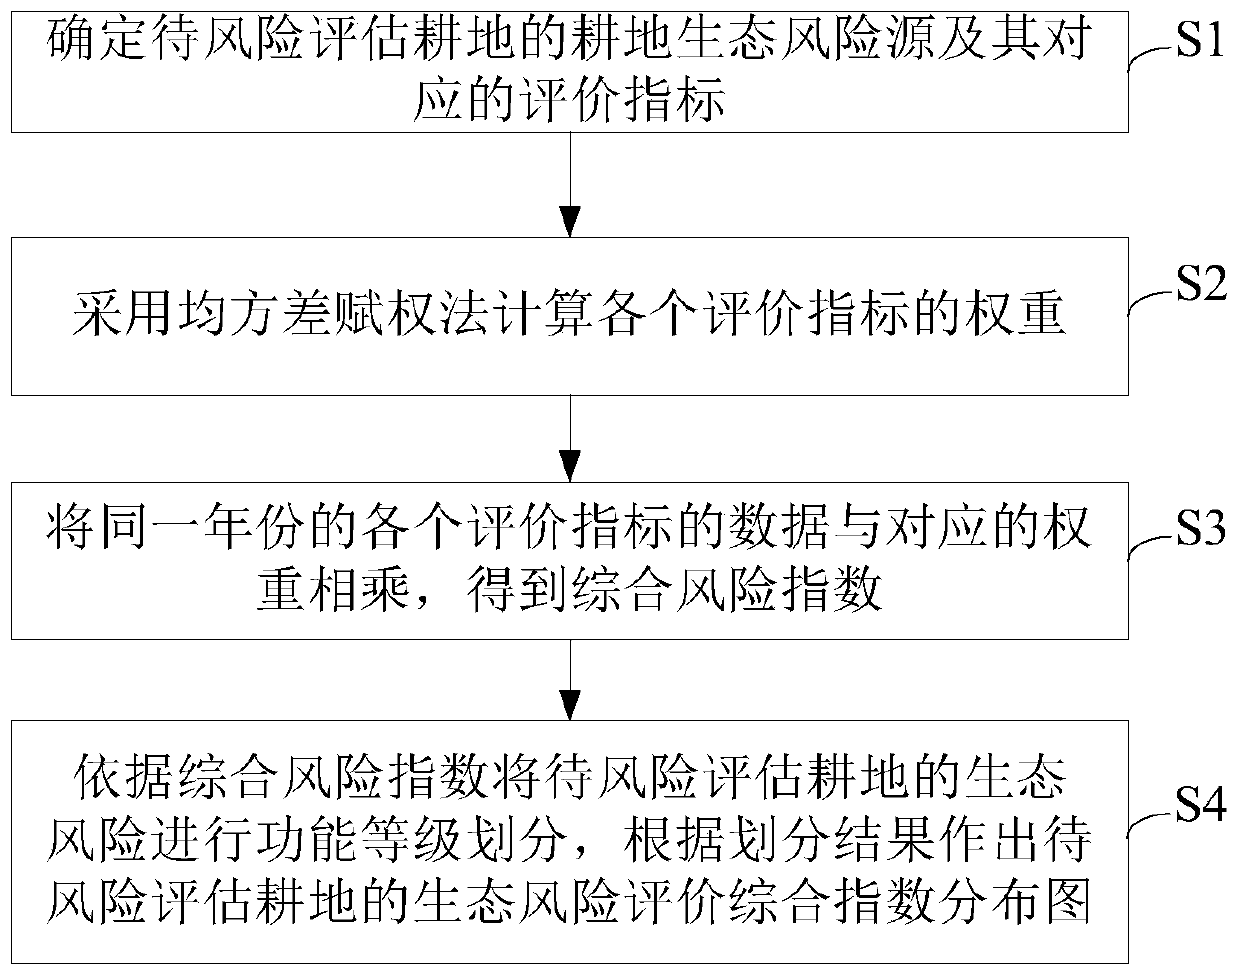 Cultivated land ecological risk evaluation method based on mean square error weighting method